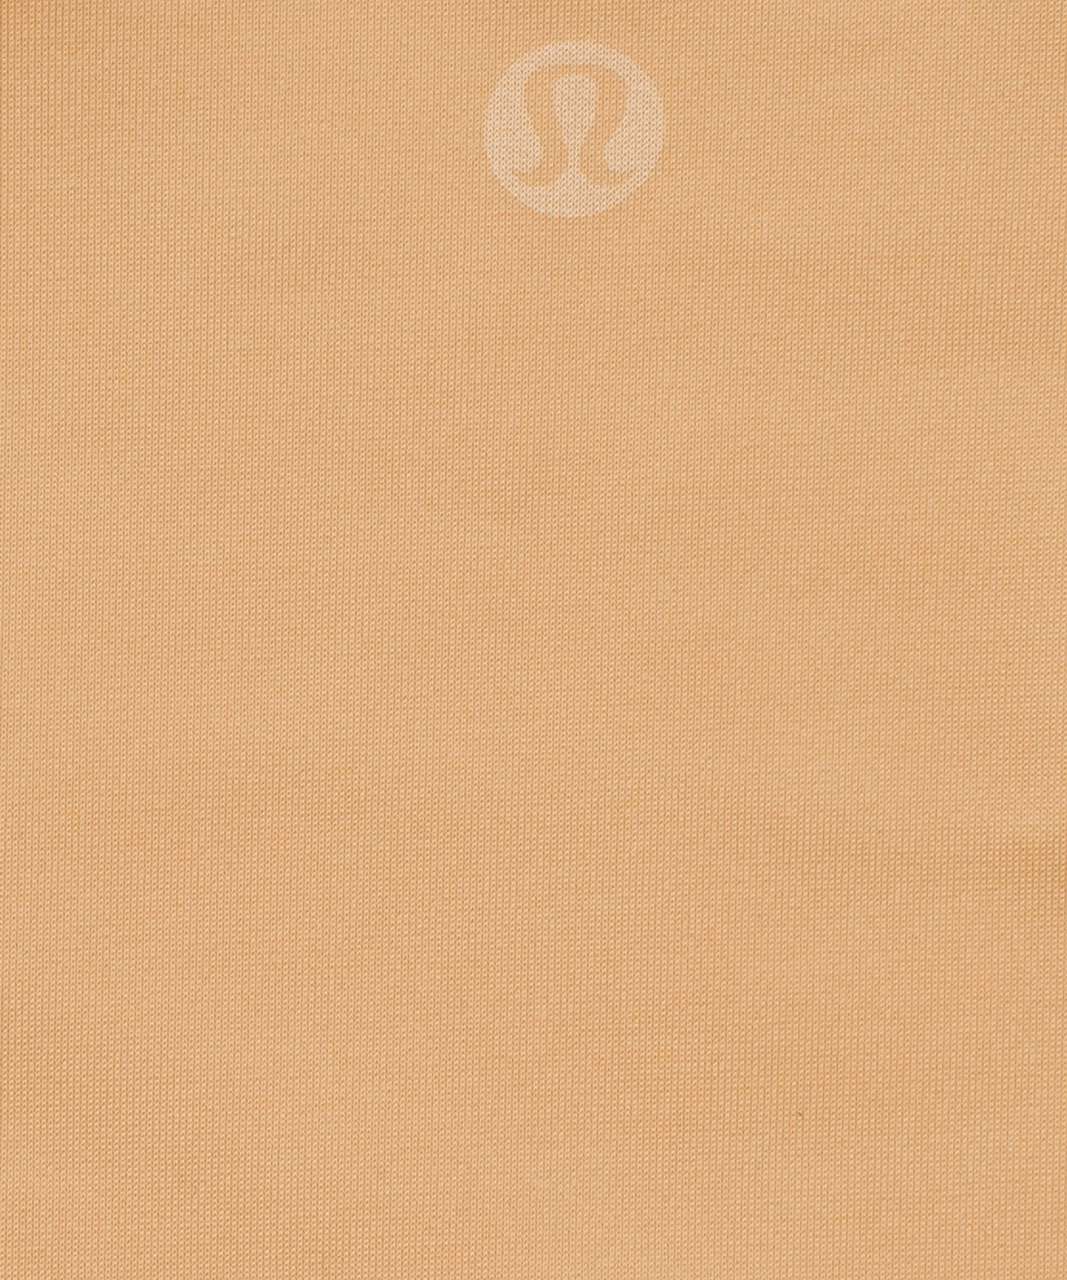 Lululemon InvisiWear Mid-Rise Hipster Underwear 3 Pack - Mulled Wine / Pecan Tan / French Press